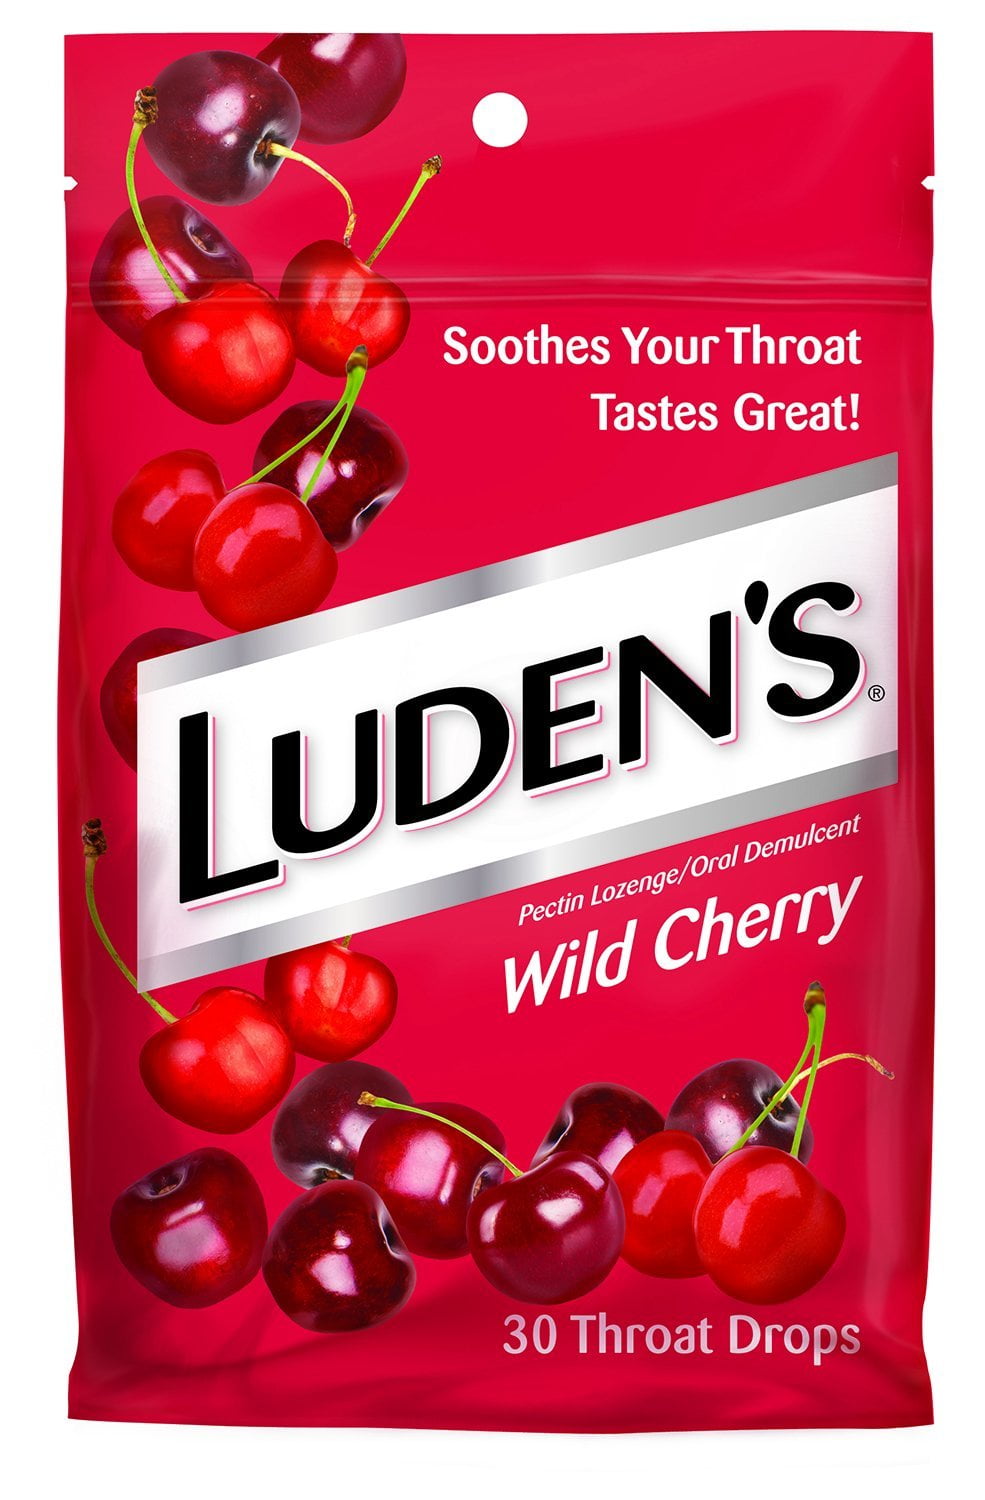 Ludens Wild Cherry Cough Drops Throat Drops 30 Count New Look Fresh